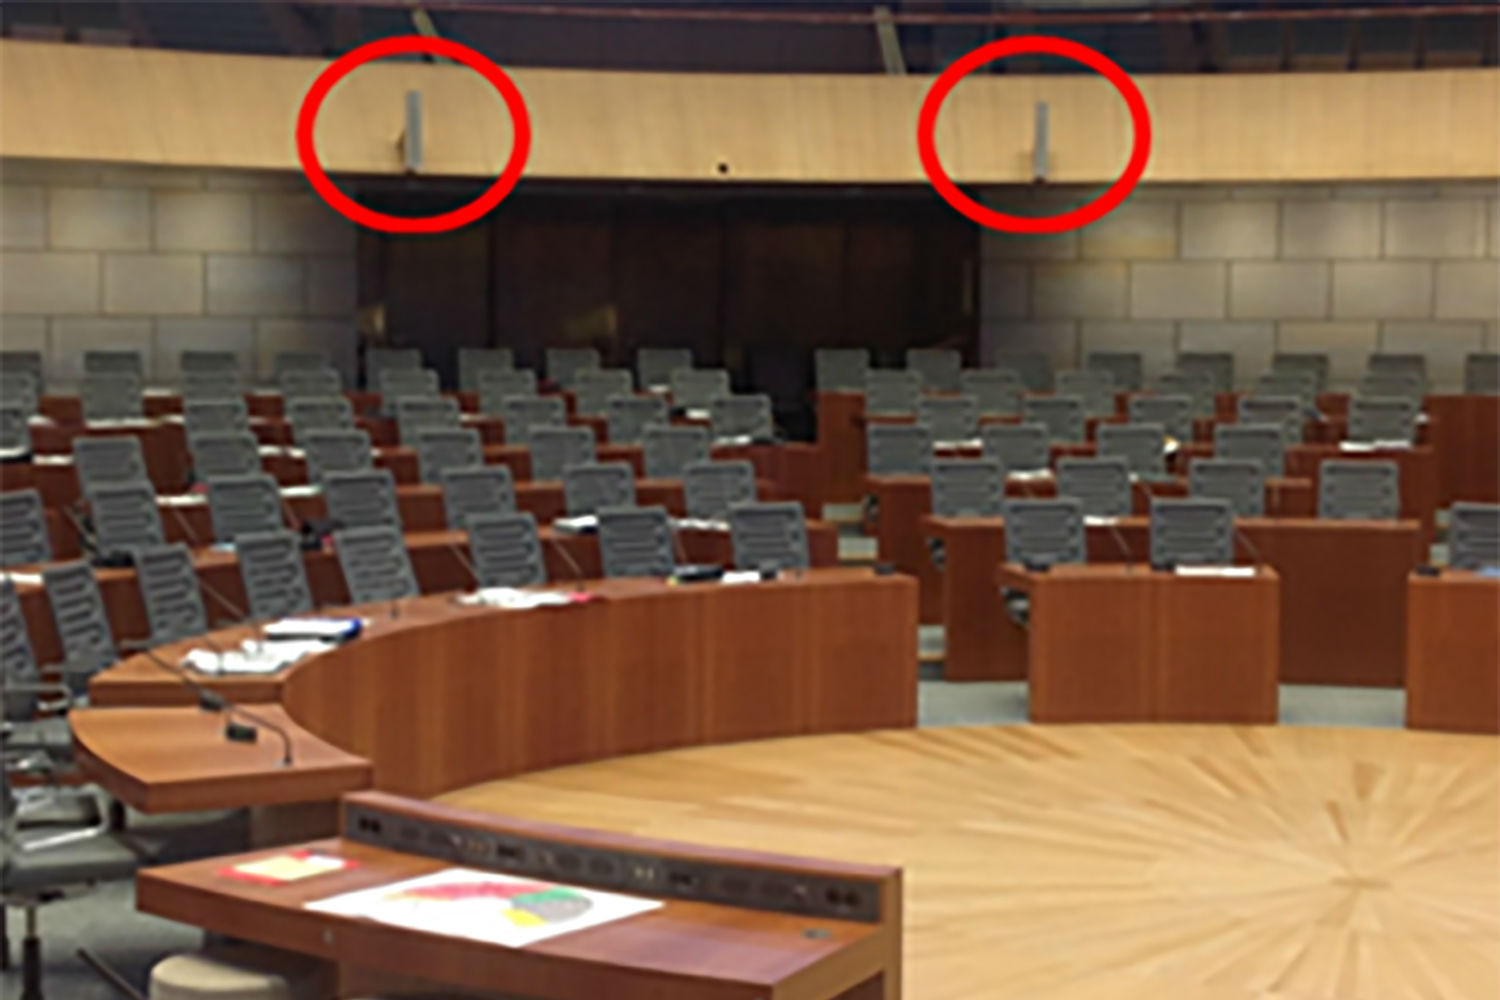 Parliament Hall Landtag in Dusseldorf, Germany. ACA-AMC, a WSDG company, in charge of the room acoustics and electro-acoustical systems. Sound System